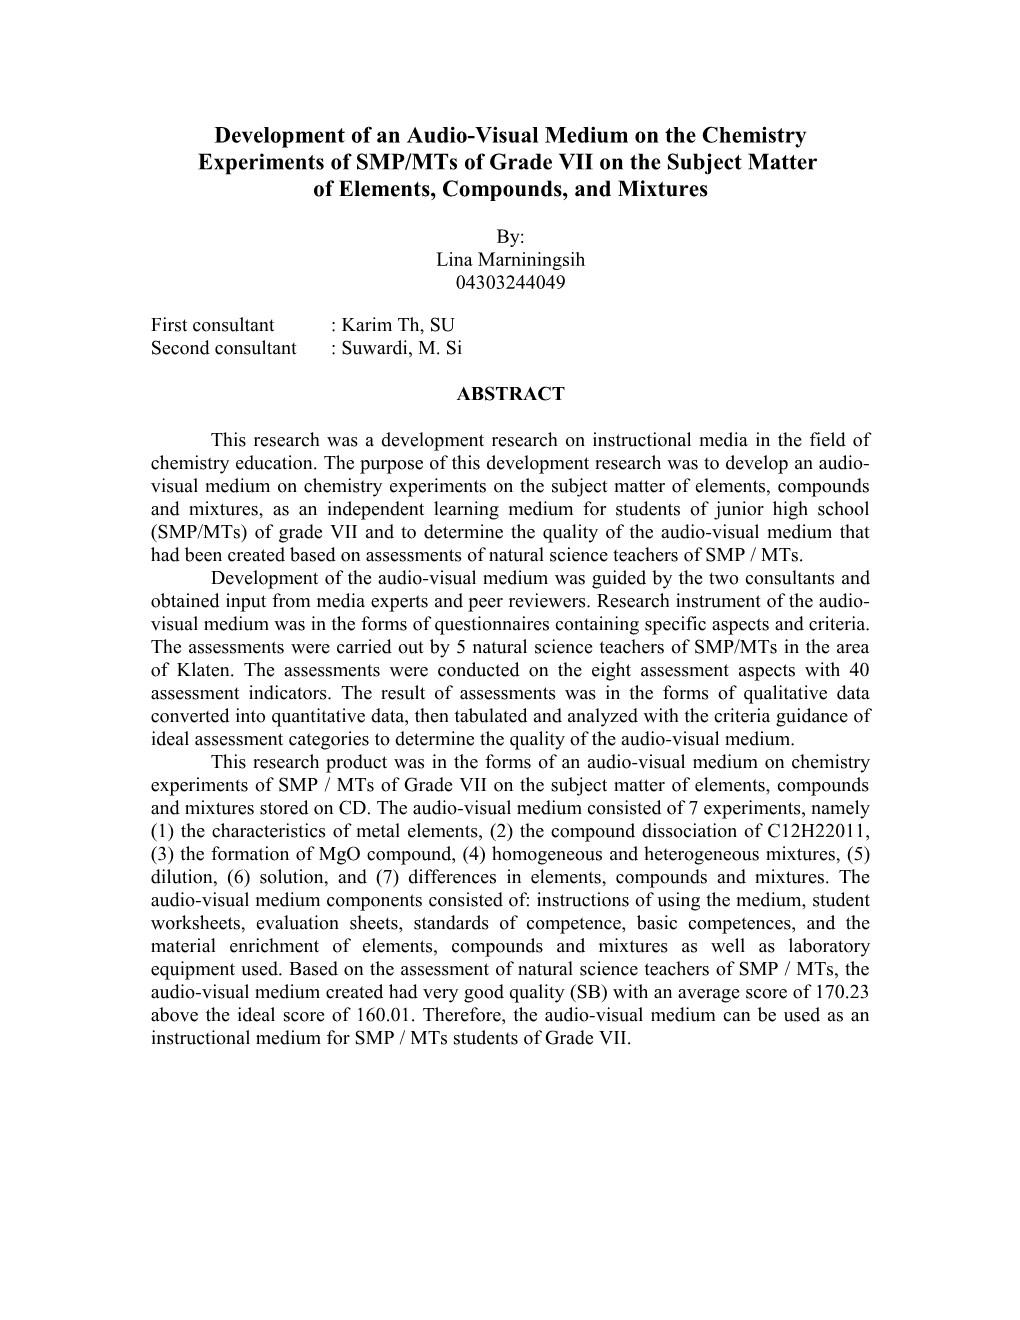 AUDIOVISUAL MEDIA DEVELOPMENT on the CHEMICAL EXPERIMENTS of SMP/Mts of GRADE VII on THE